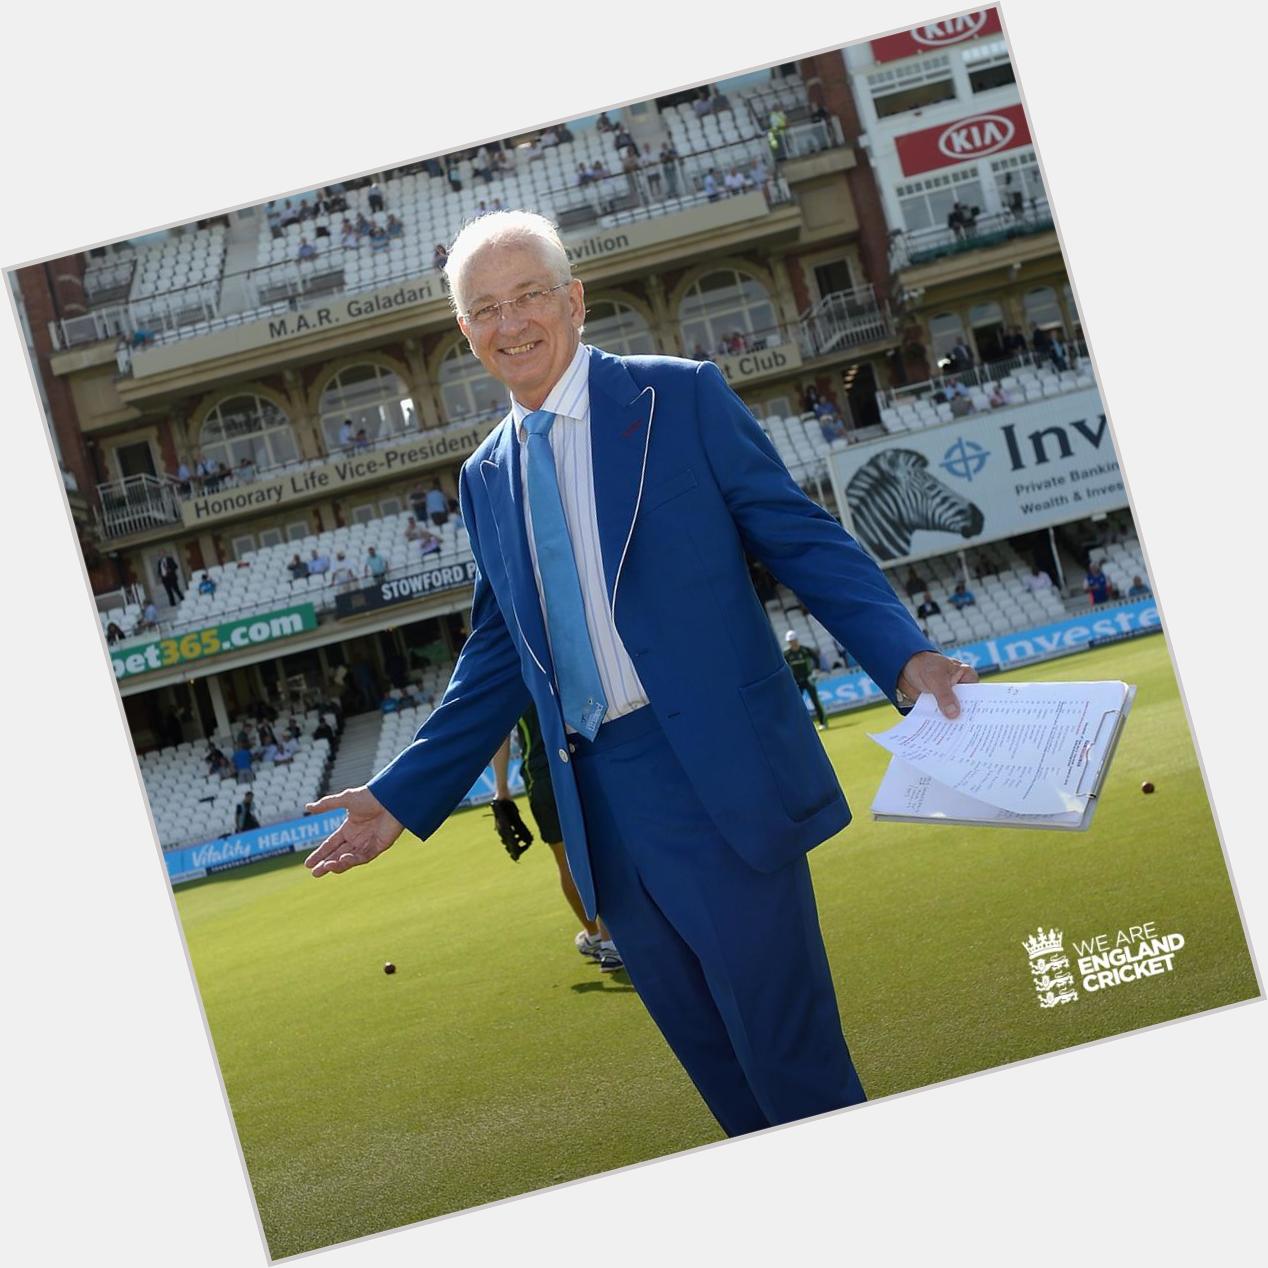  Happy birthday to our former captain David Gower! 117 Tests
8231 runs
18 centuries

An all-time great. 